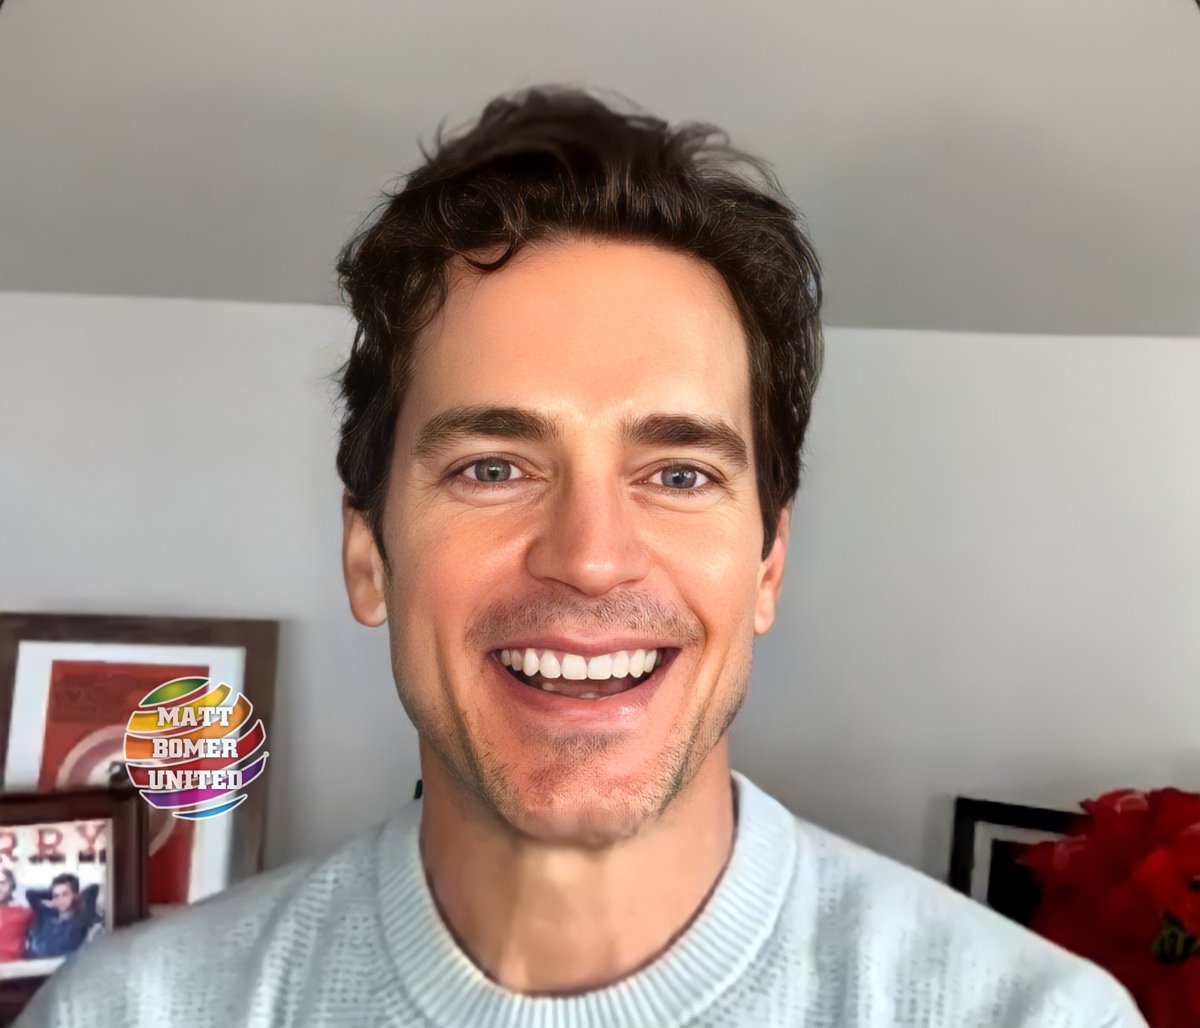 Finishing off today with some screenshots of #MattBomer during his chat with #KimberlySnyder. See you tomorrow.